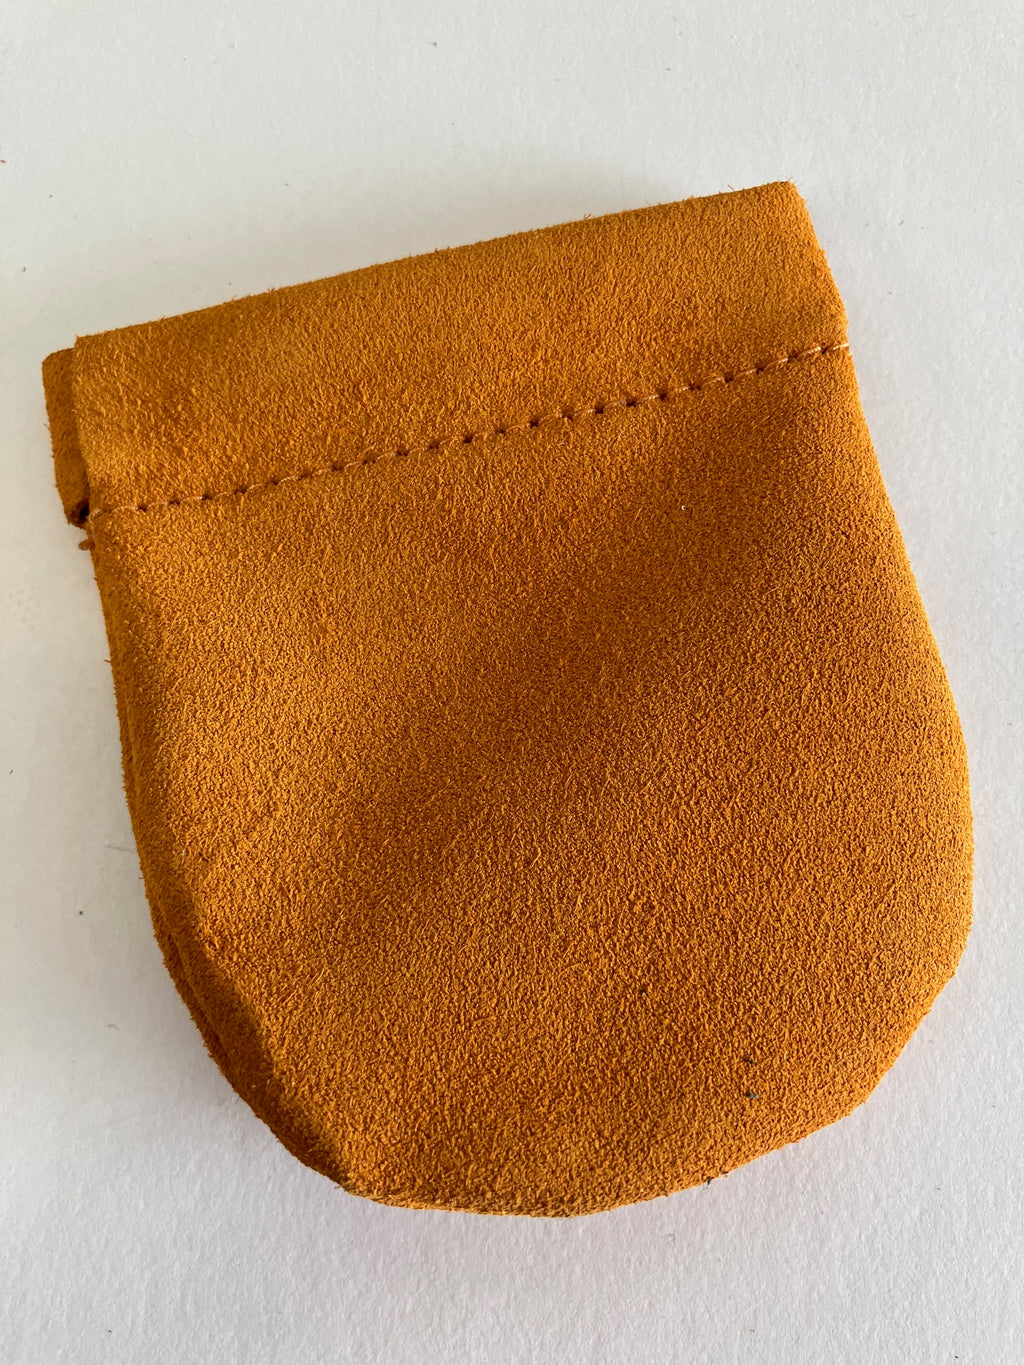 SAMPLE Leather wallet, squeeze frame coin purse tangerine orange suede